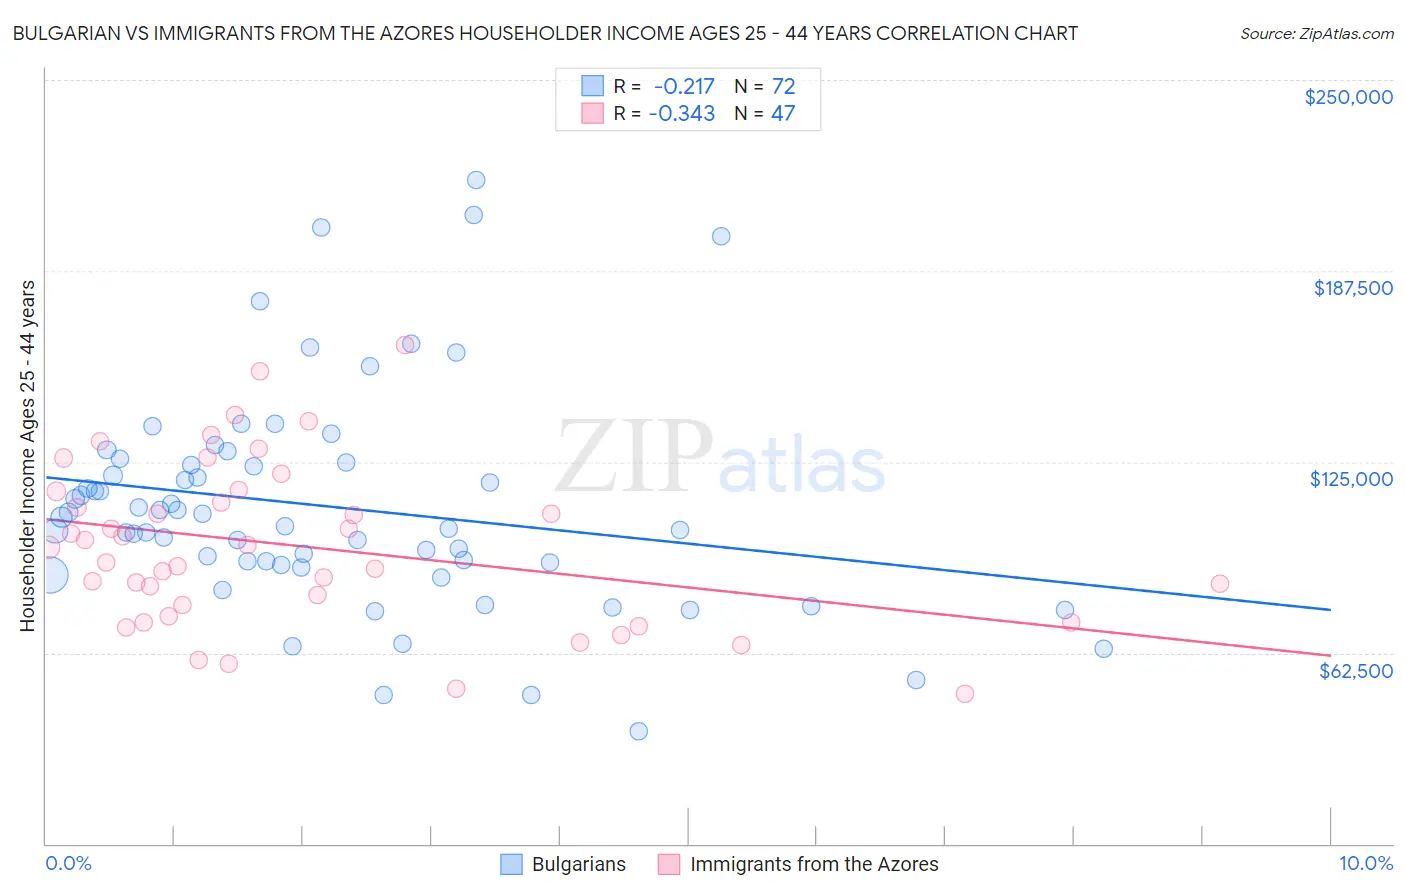 Bulgarian vs Immigrants from the Azores Householder Income Ages 25 - 44 years